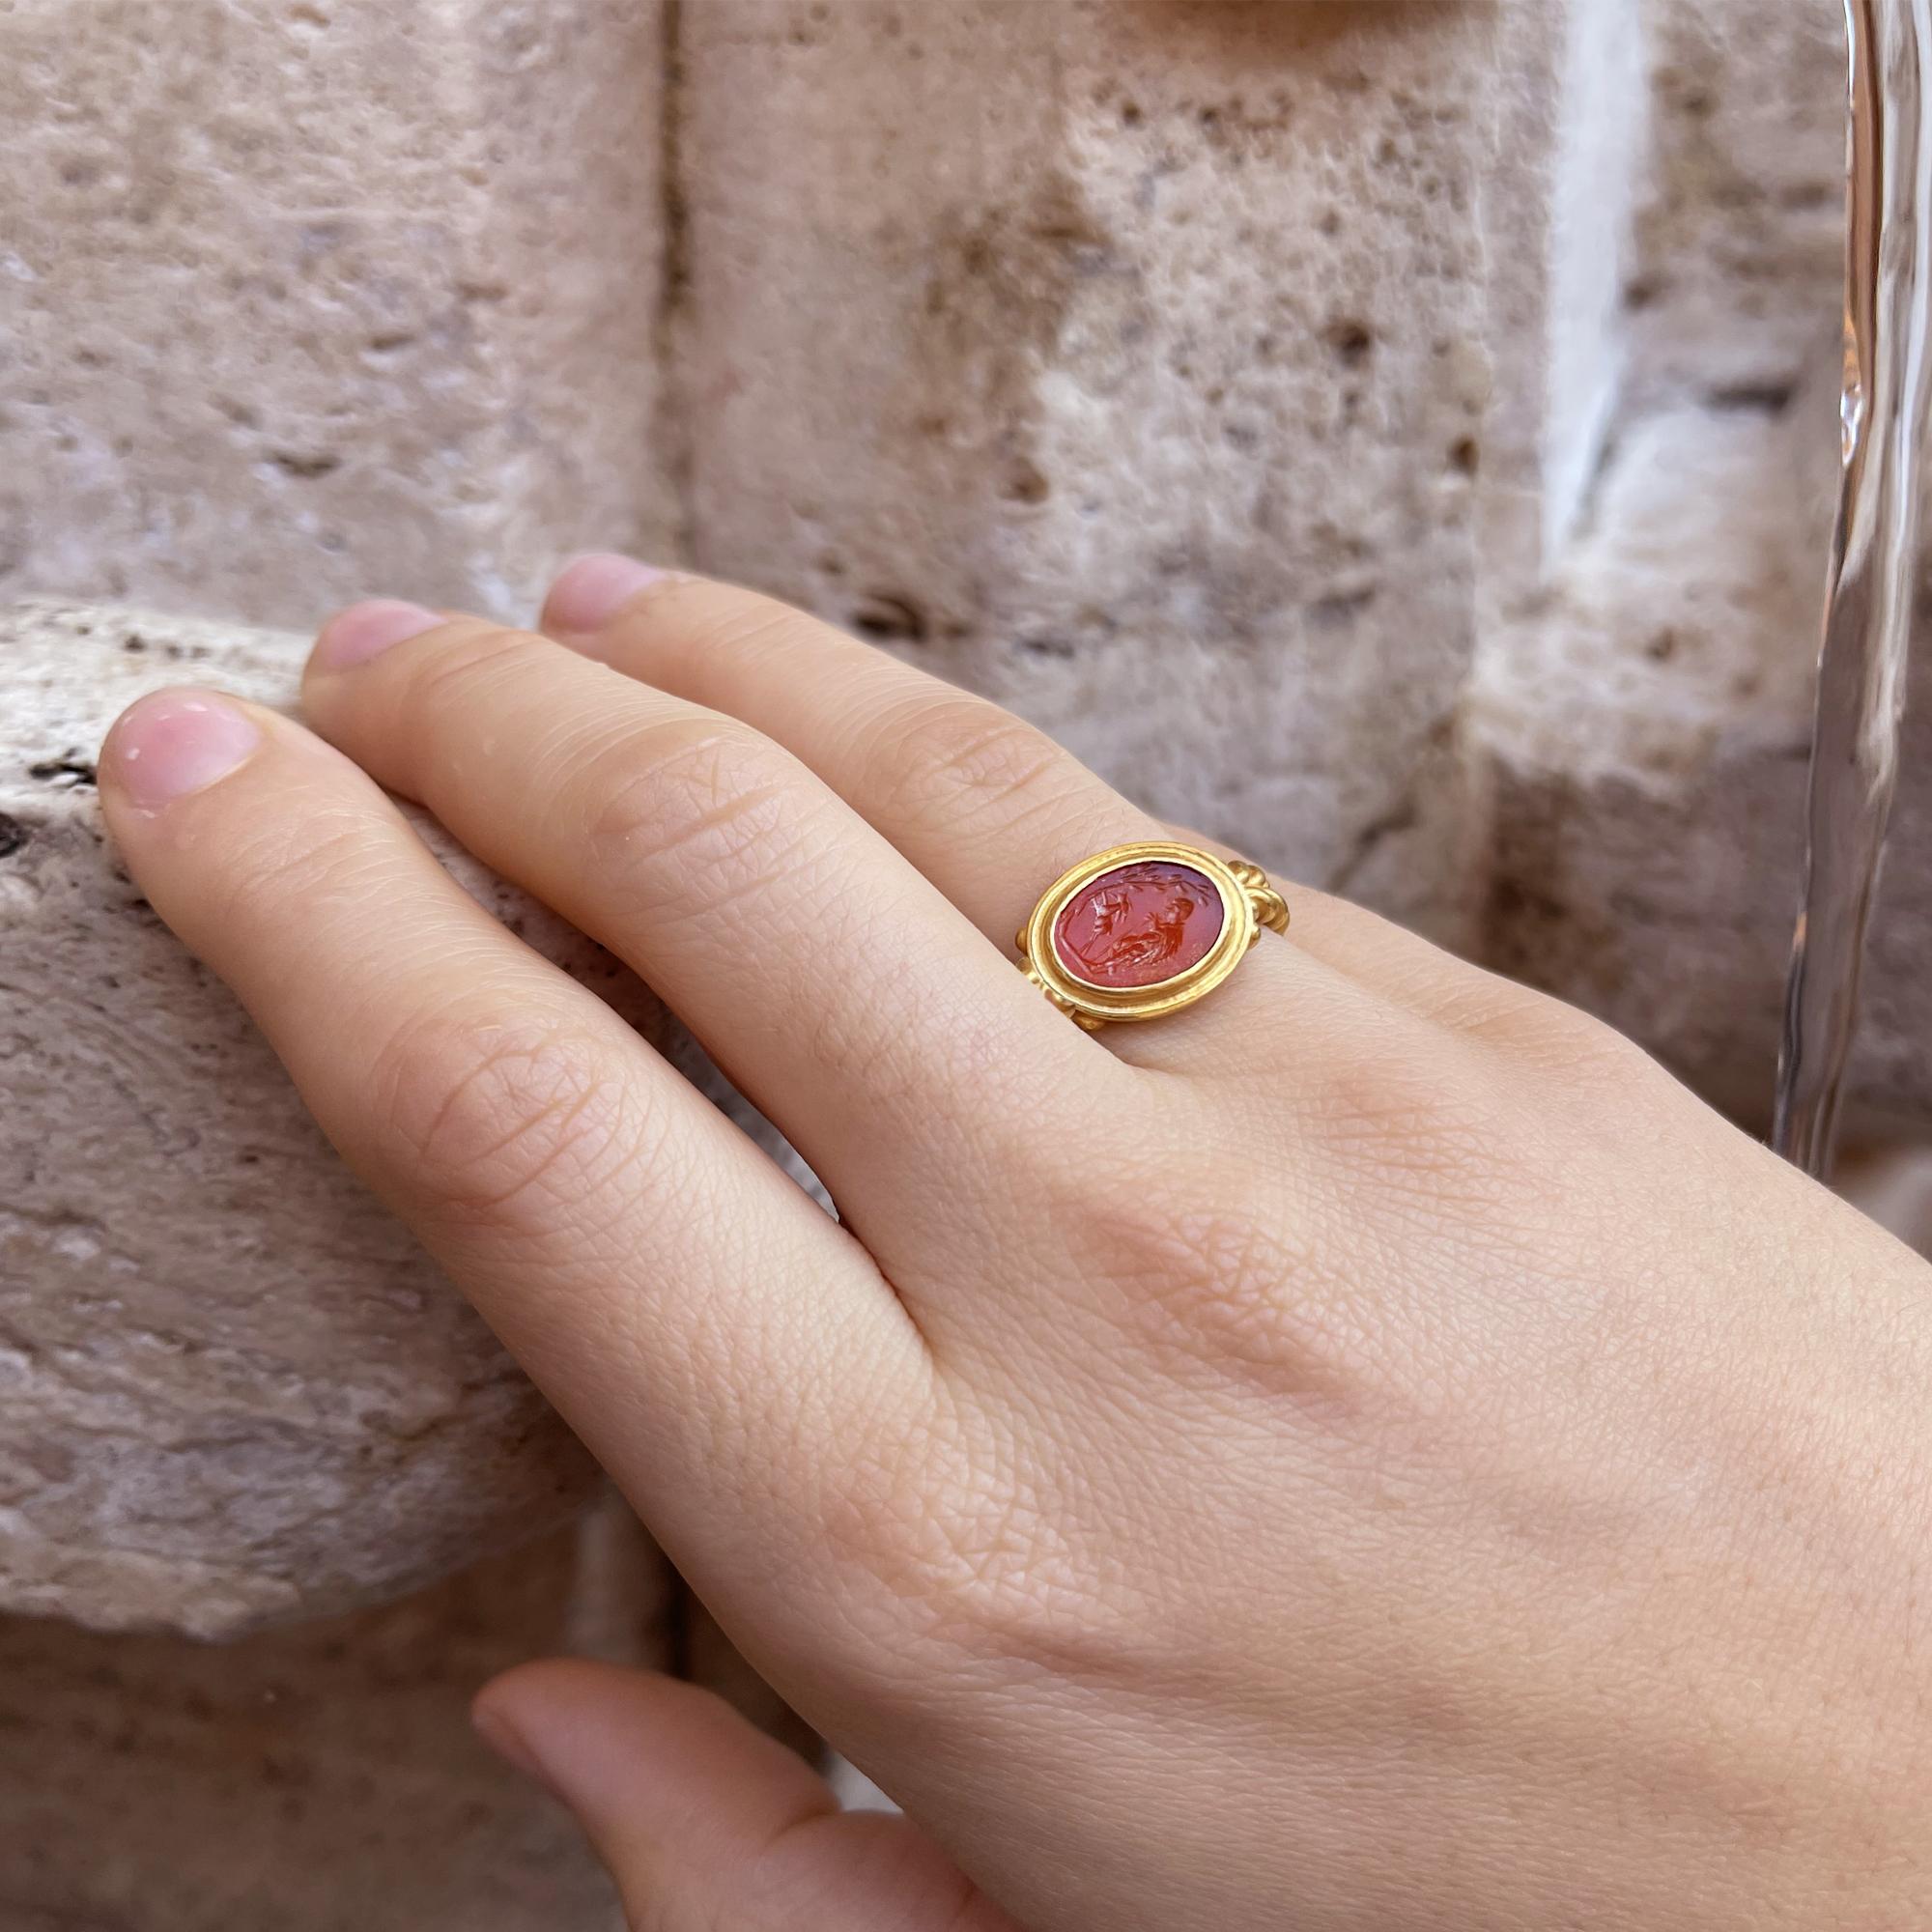 An authentic Roman carnelian from the 1st-2nd century AD has been set in this 18 kt gold ring which depicts the goat Amalthea resting with the two front legs on a tree, and a shepherd behind her. The mythology says that Jupiter was the son of